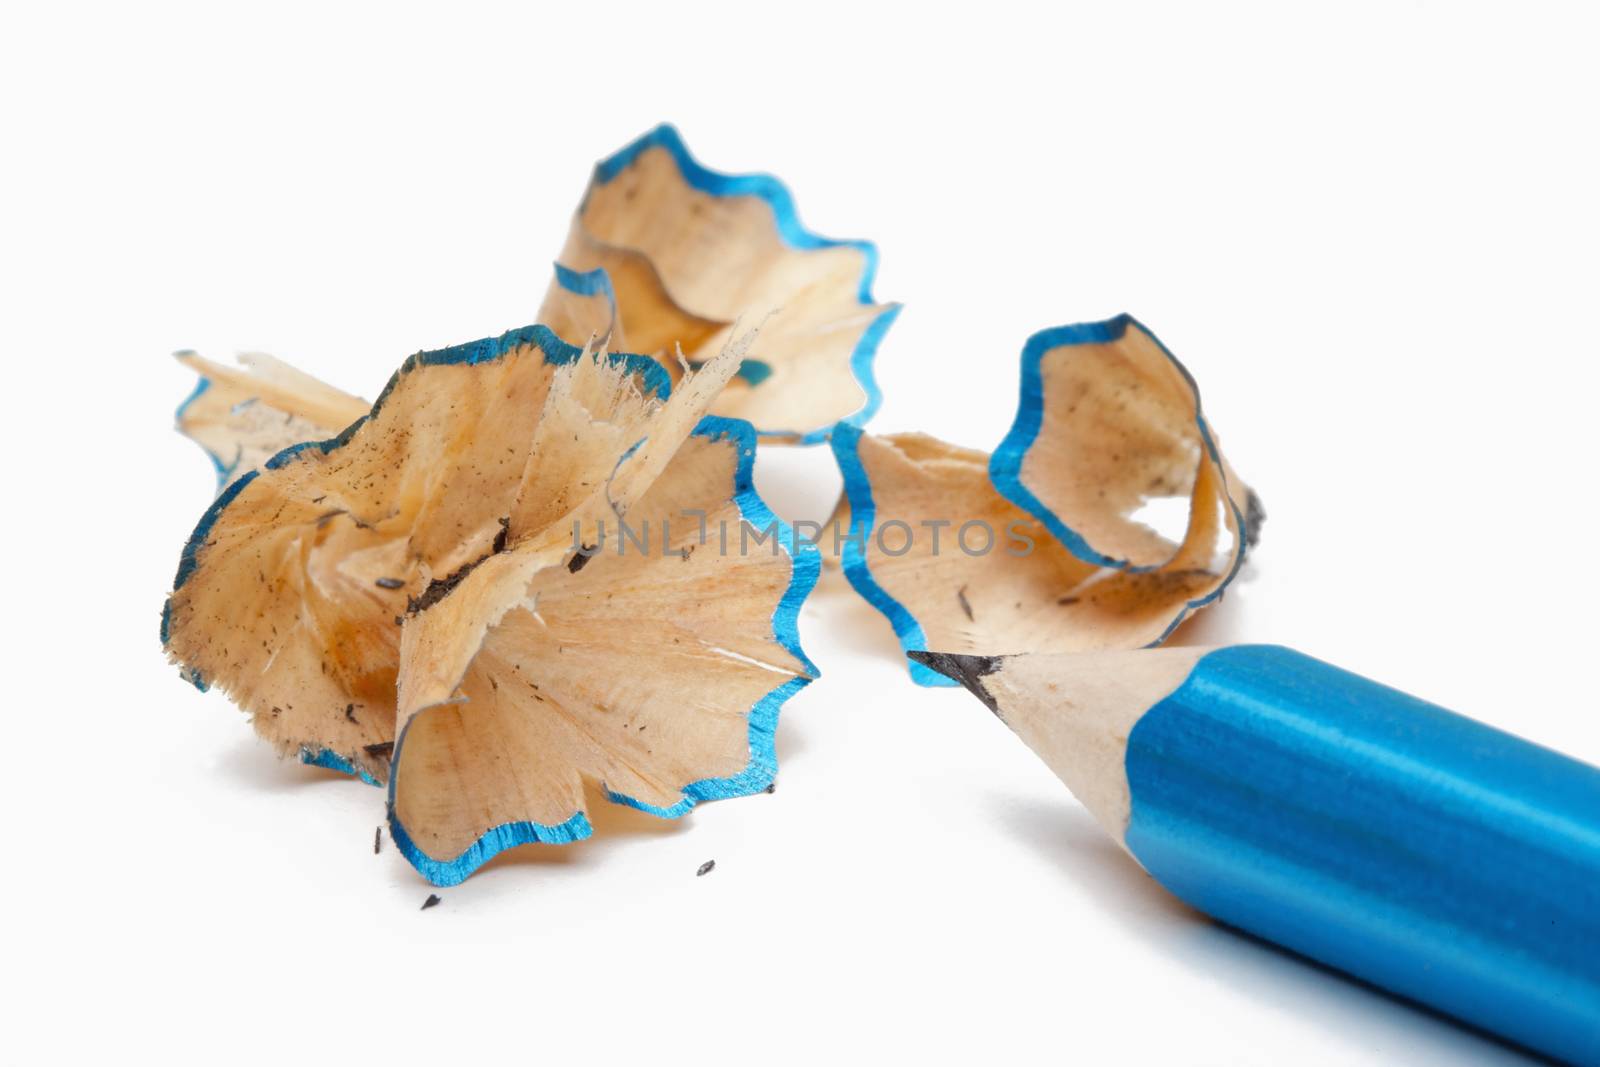 pencil with shavings after being sharpened isolated on white